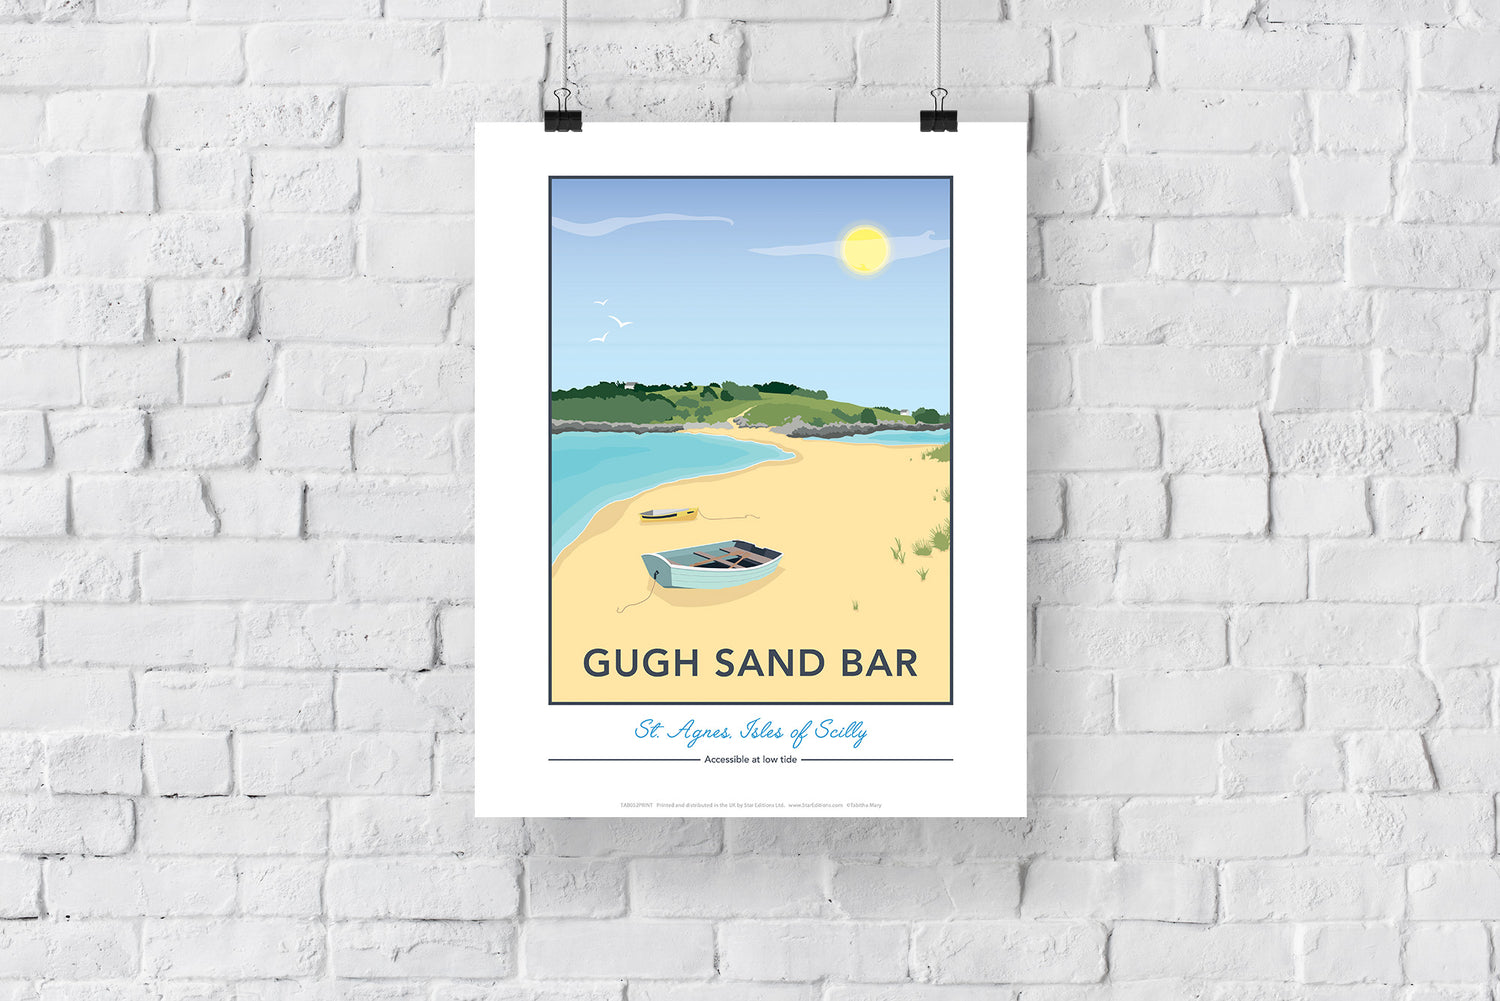 Gugh Sand Bar, St Agnes, Isles of Scilly - Art Print